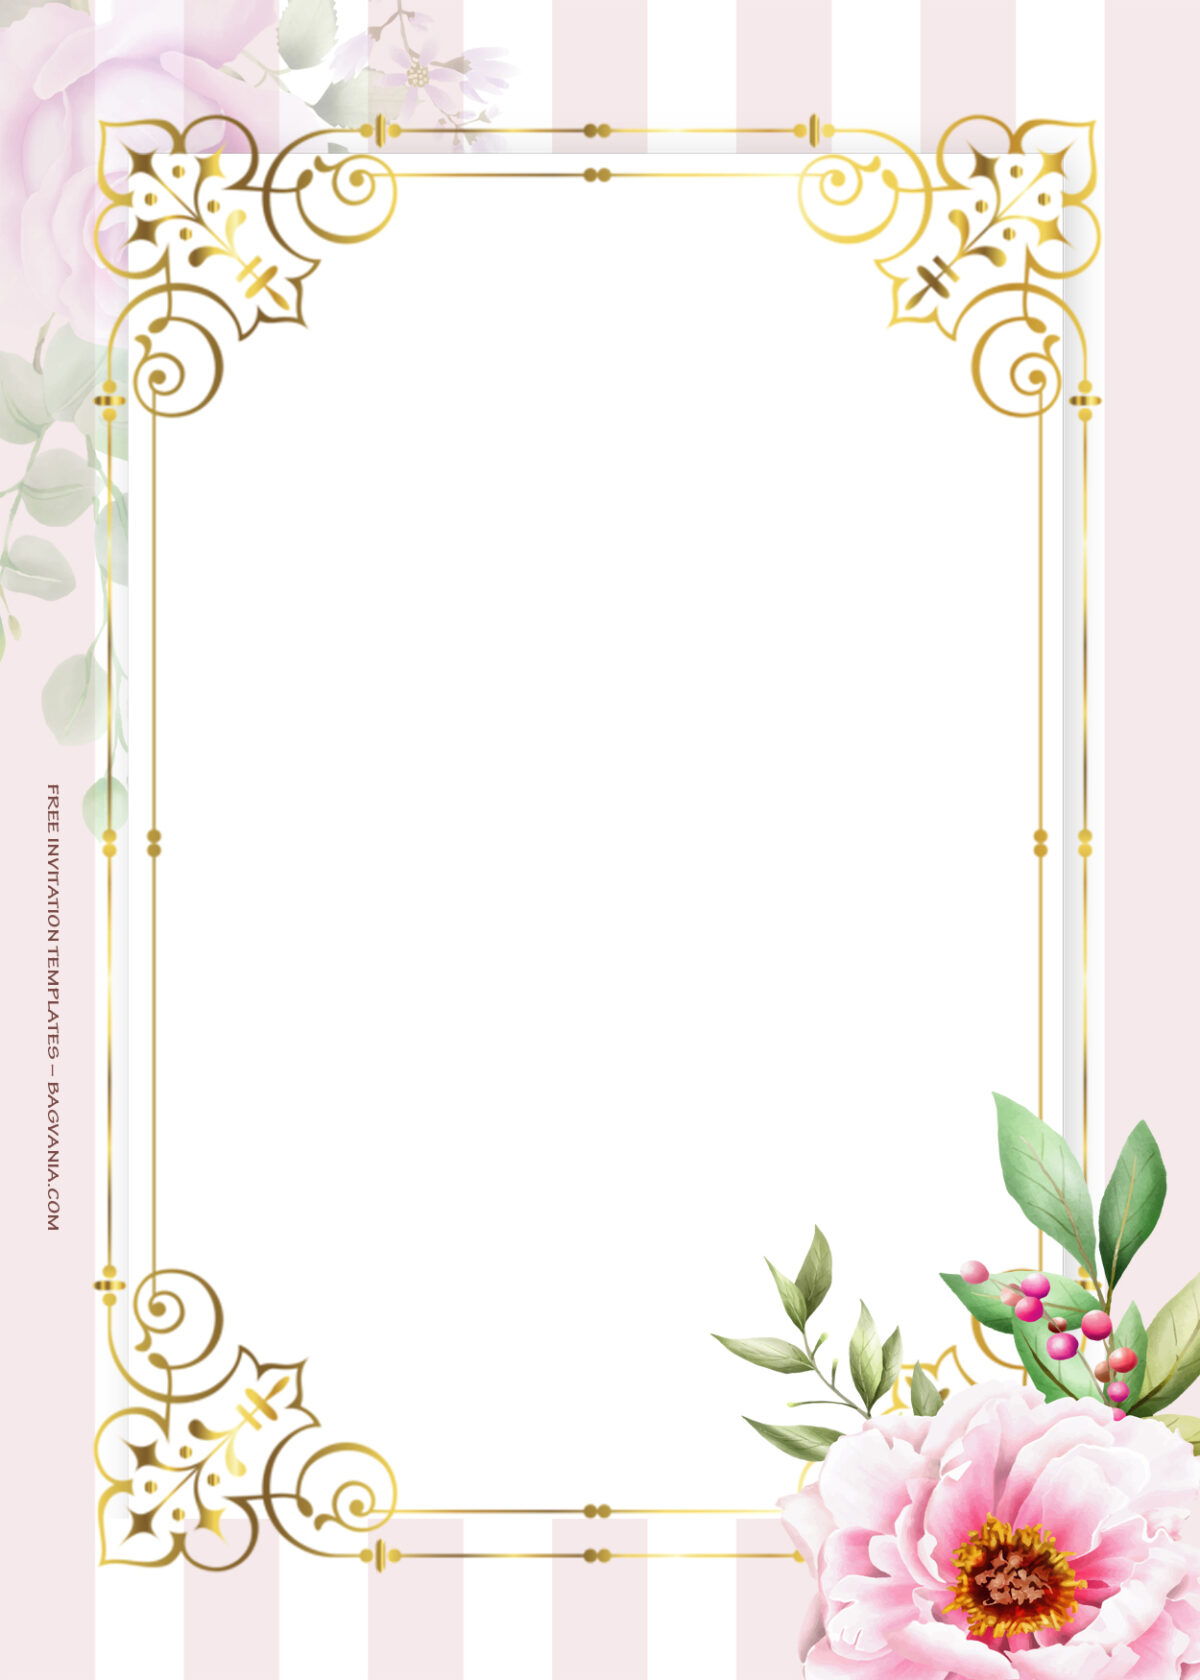 8+ Fancy With Gold Blossom Floral Wedding Invitation Templates | FREE ...